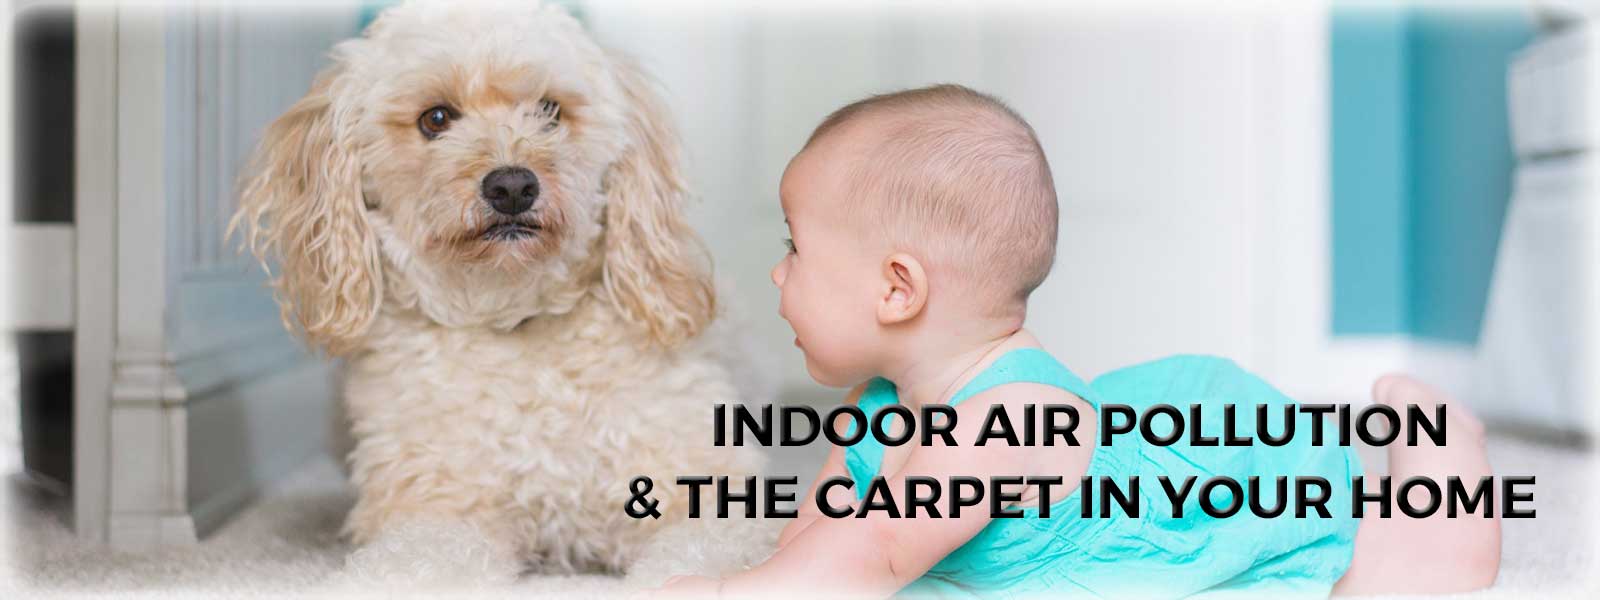 indoor-air-pollution-and-the-carpet-in-your-home